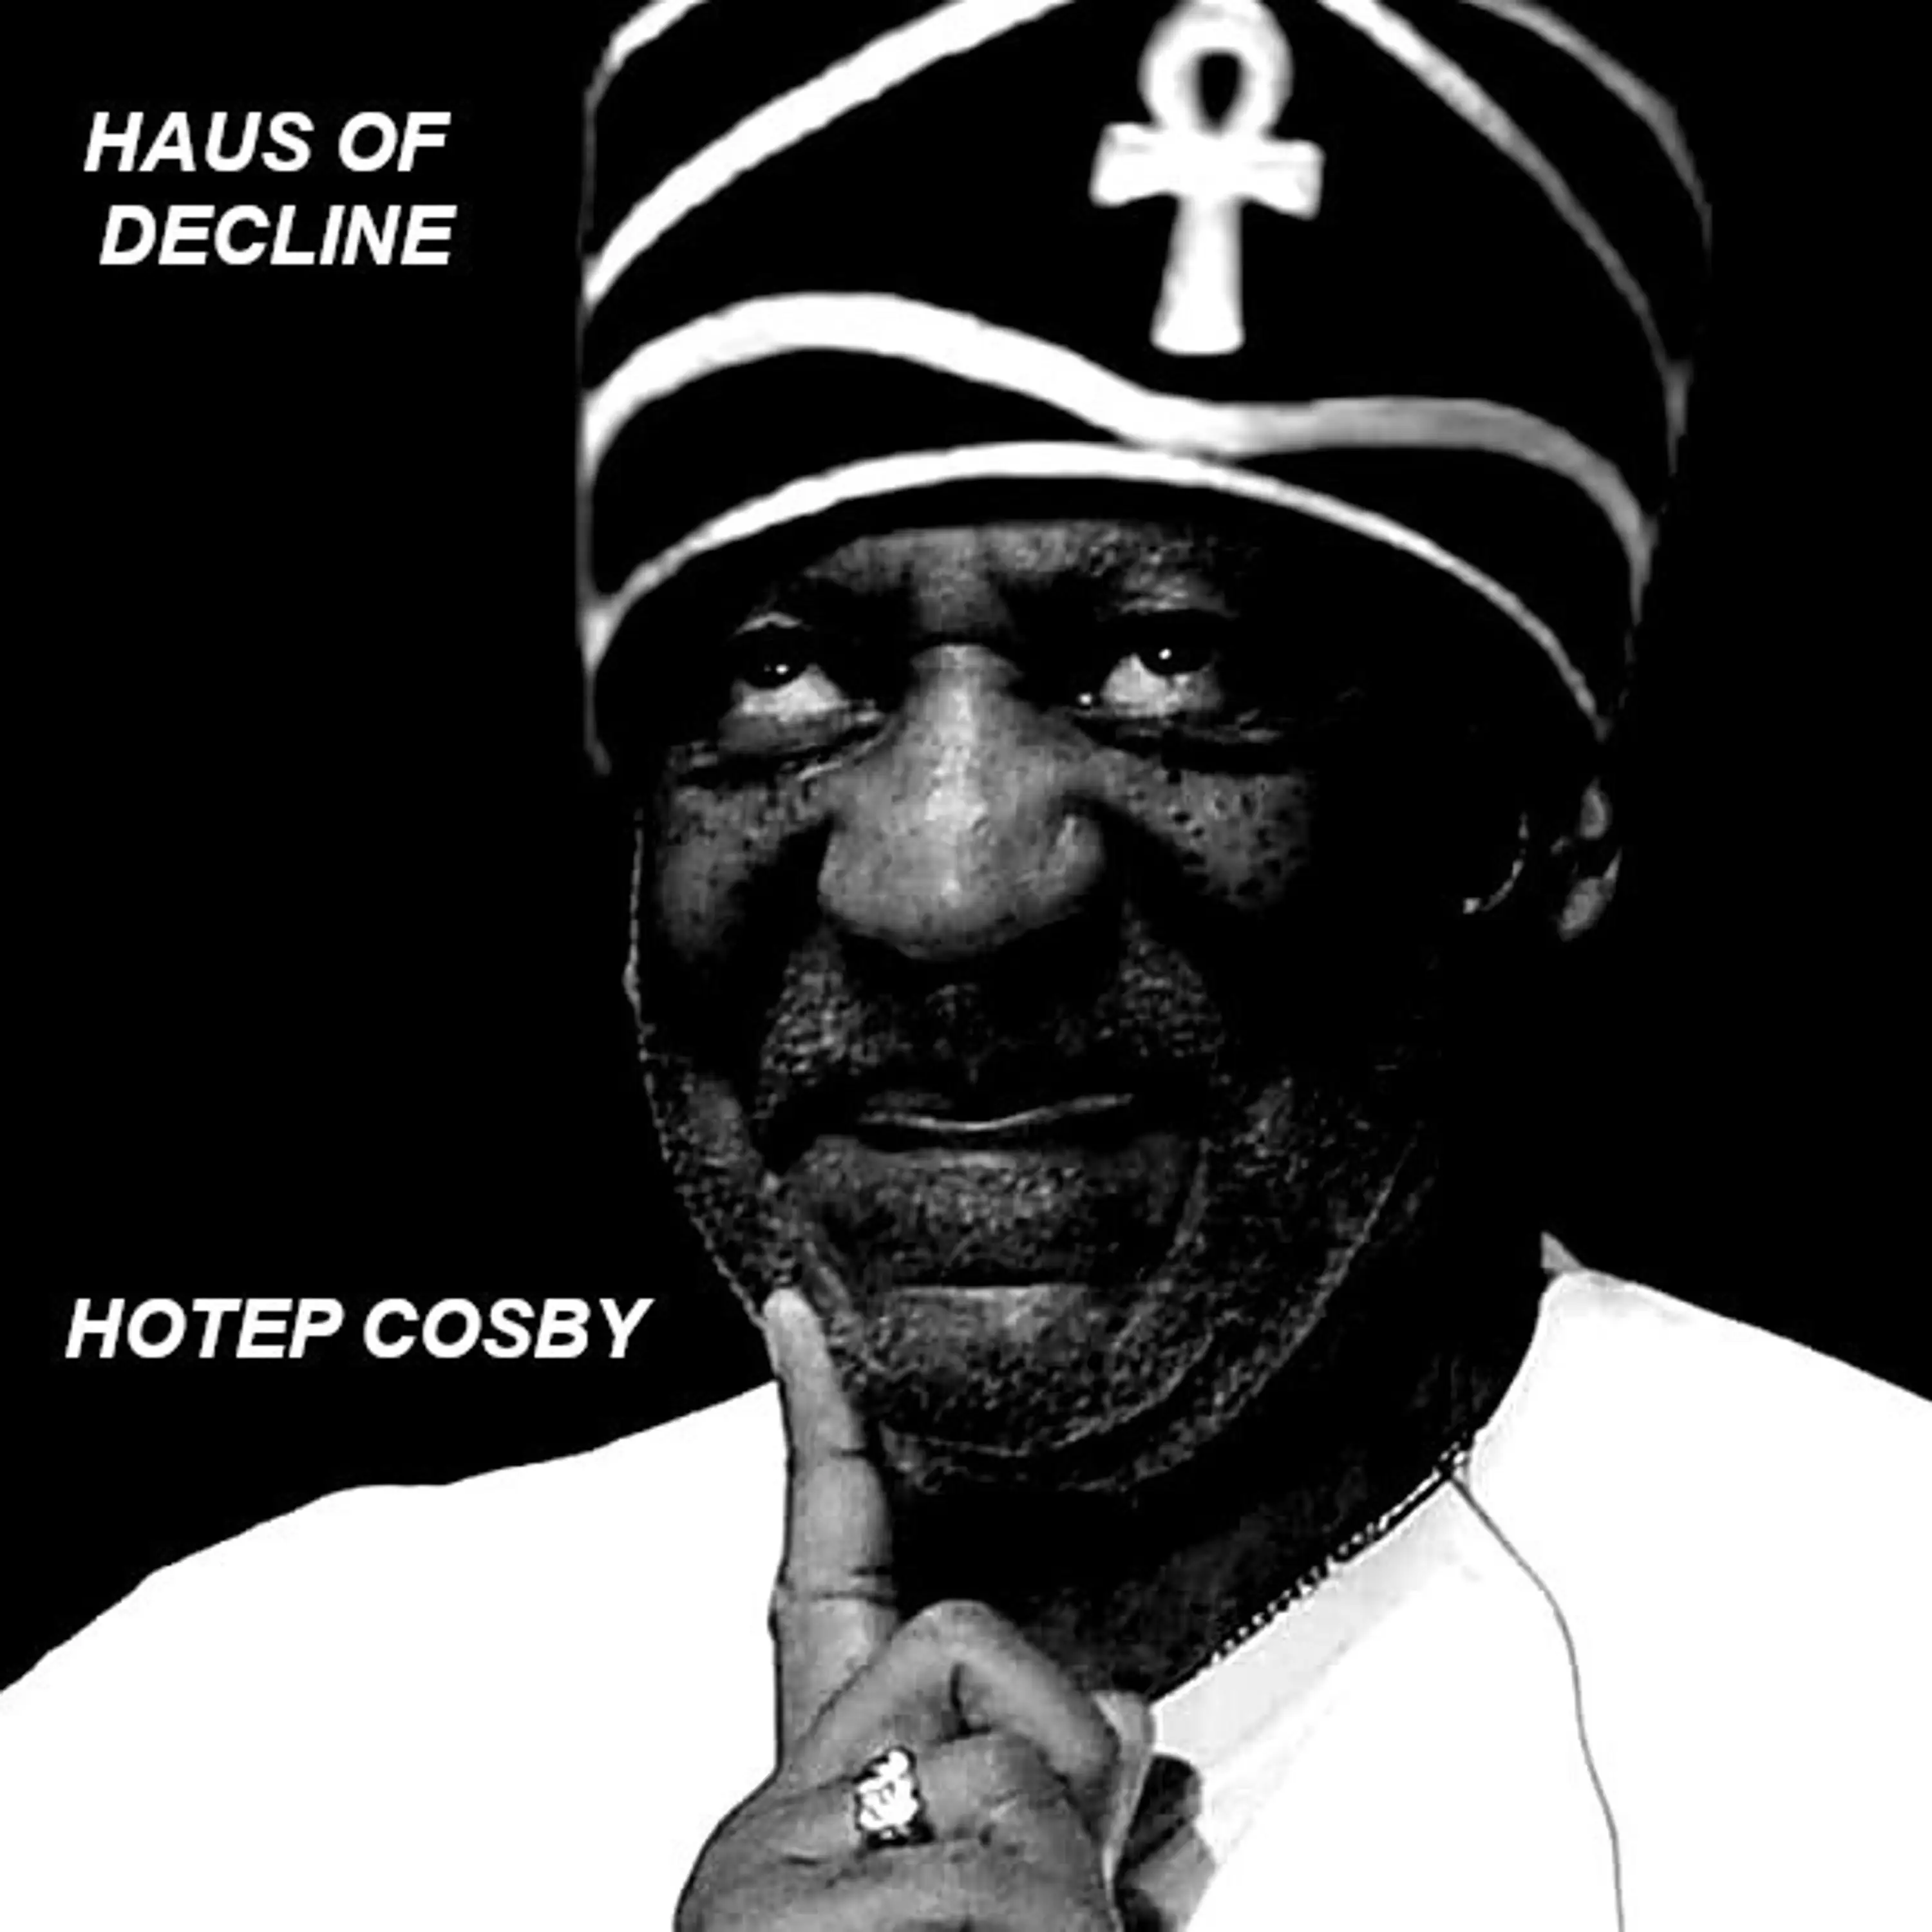 Hotep Cosby